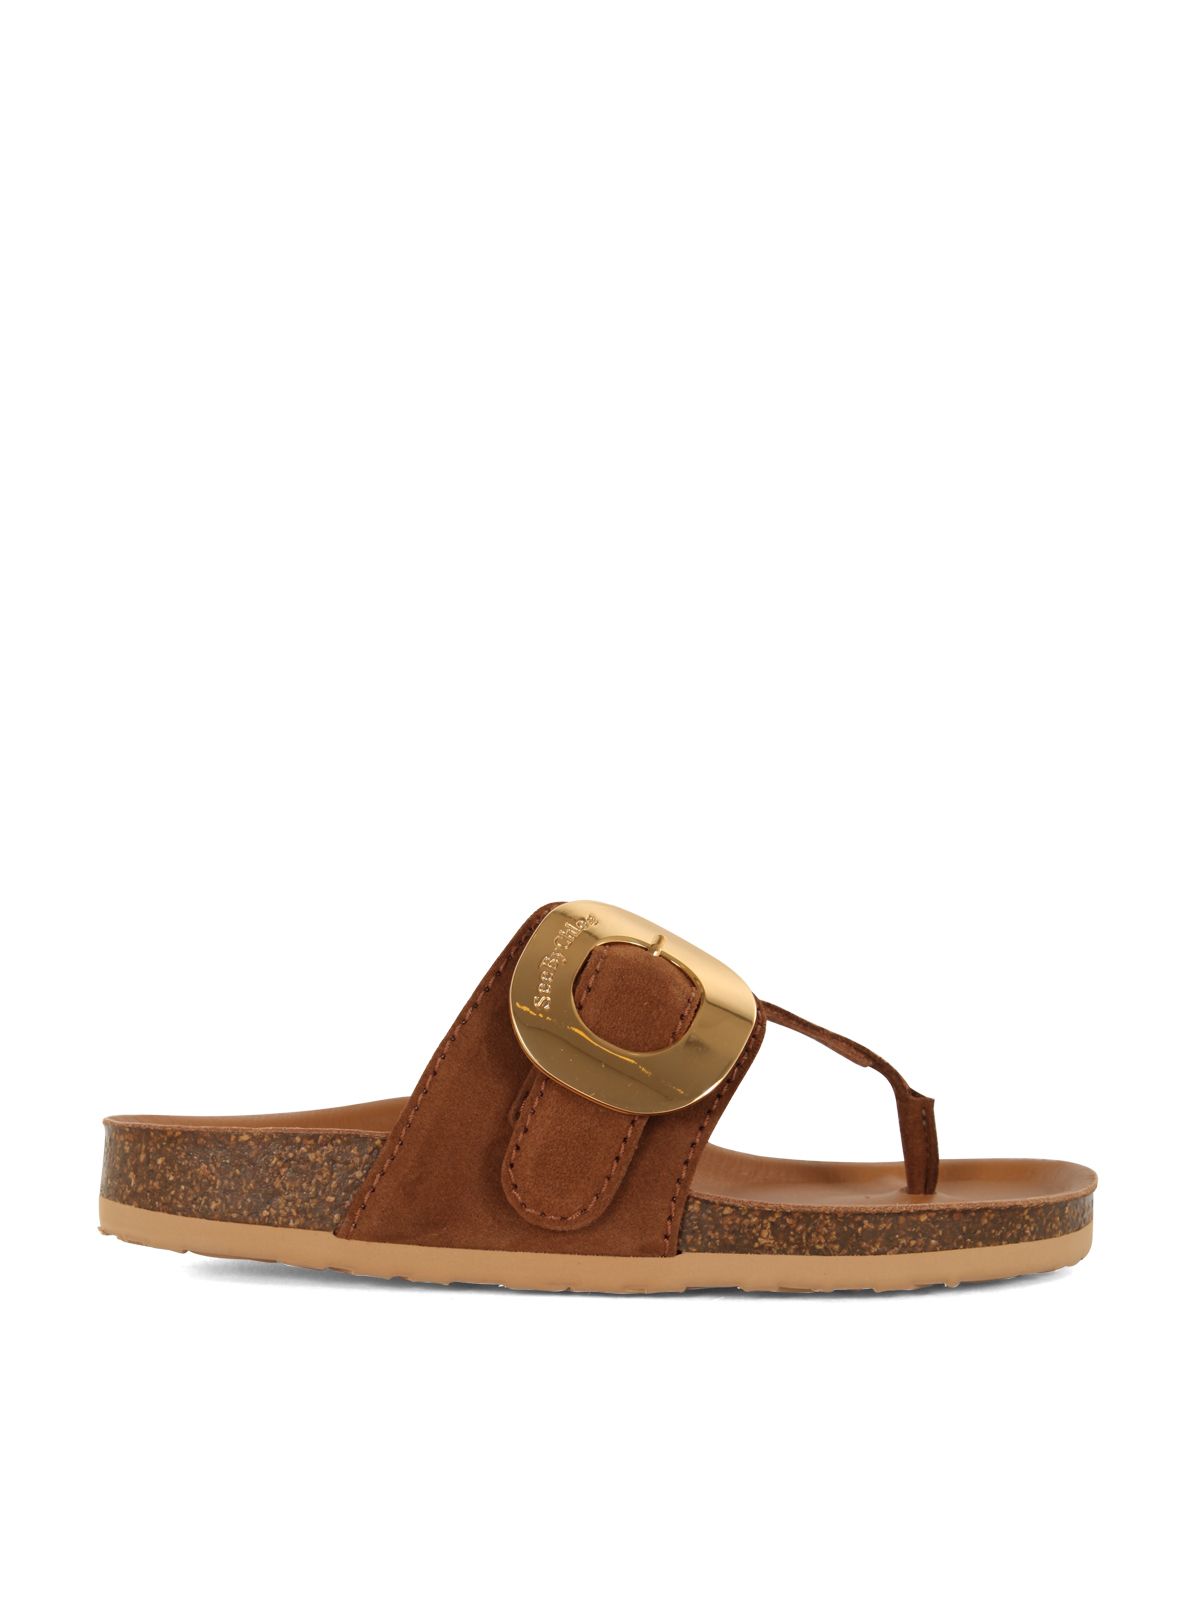 Shop See By Chloé Women's Sandals: Chany Fussbett